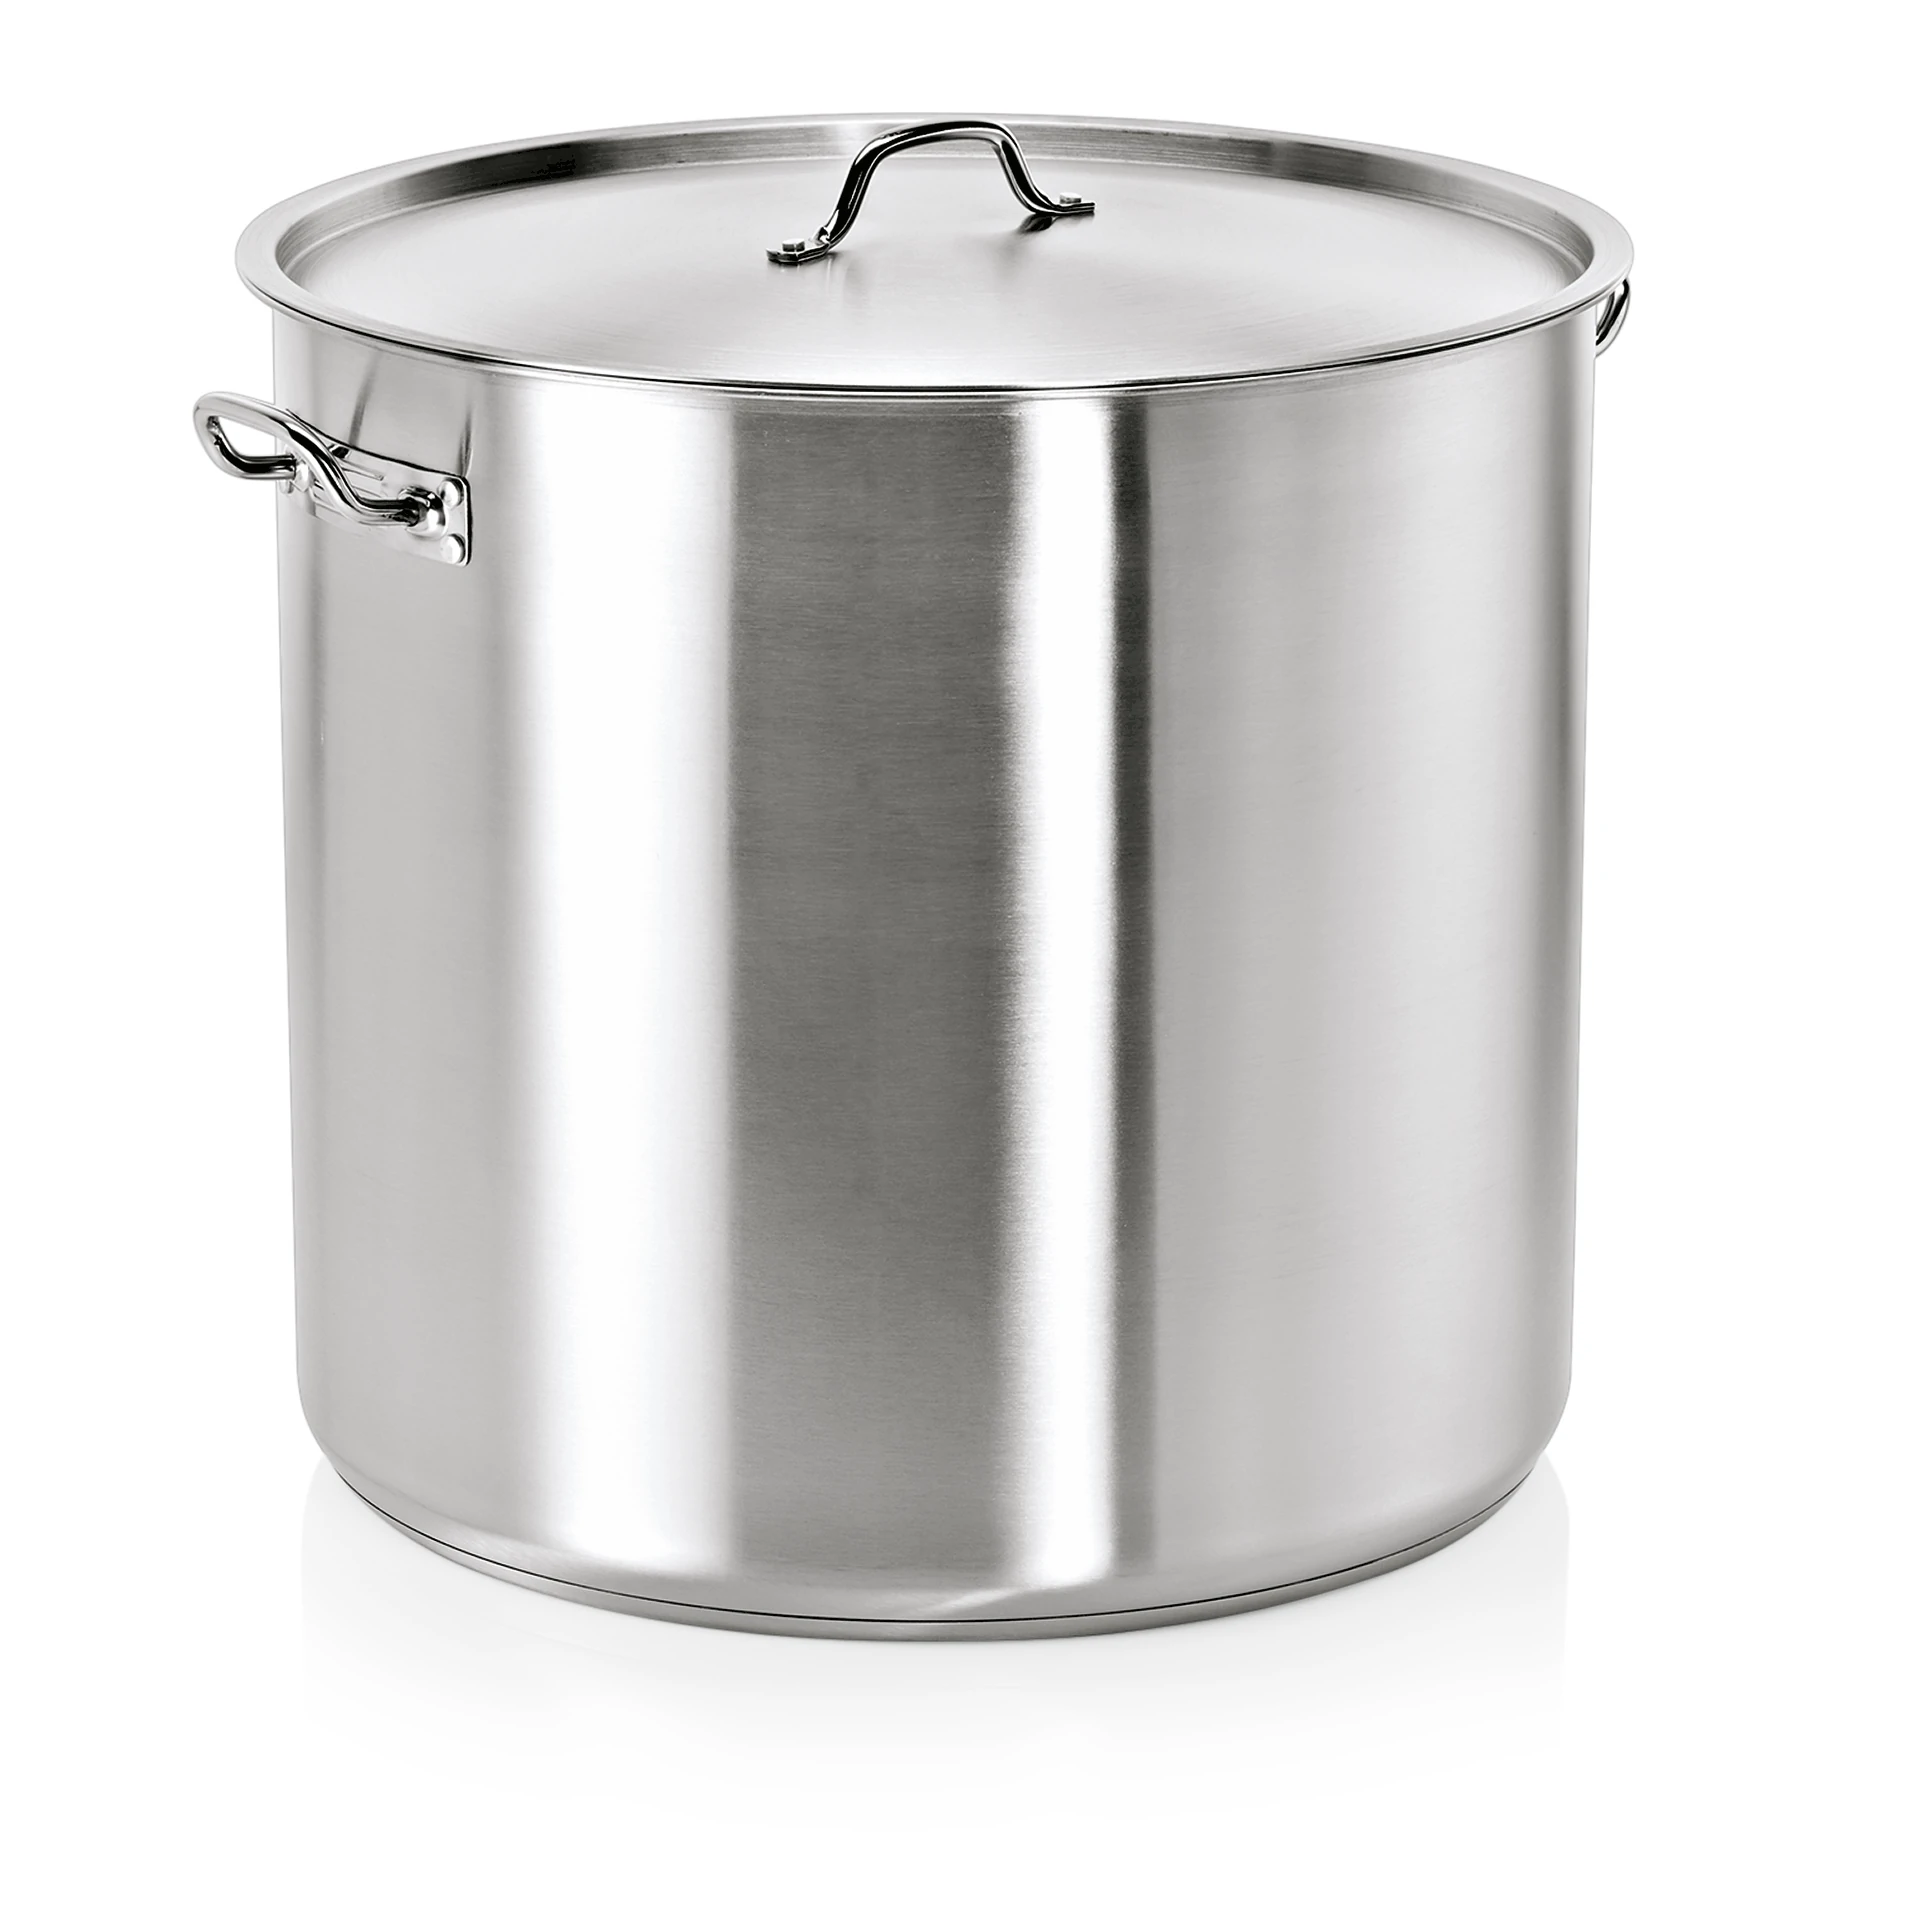 Stockpot with lid